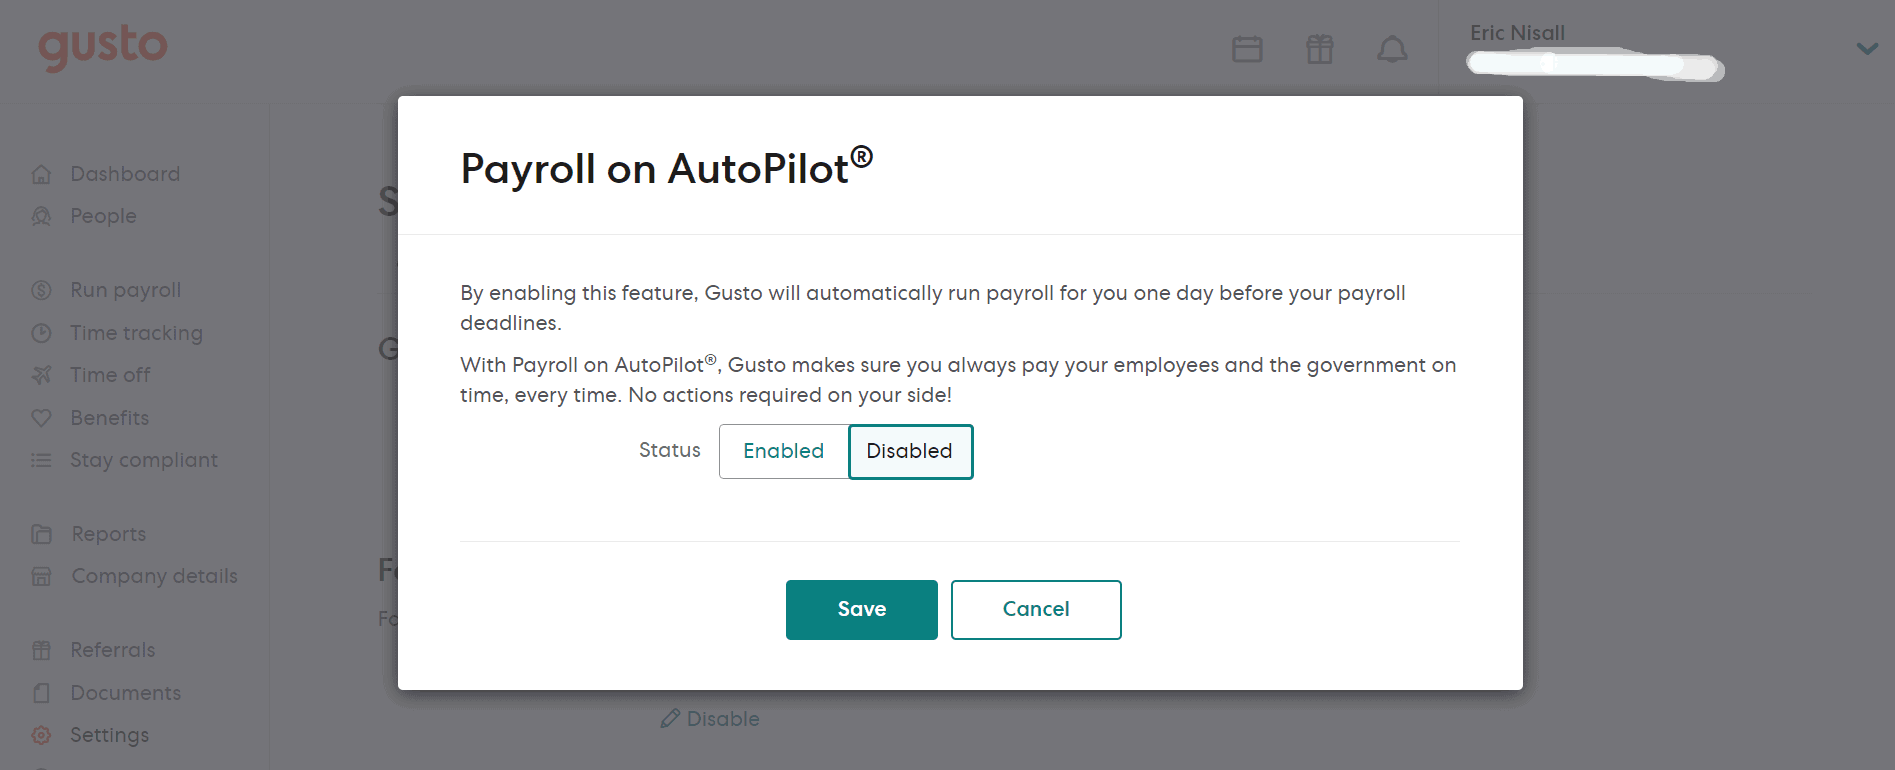 Automated Payroll feature of Gusto screenchot